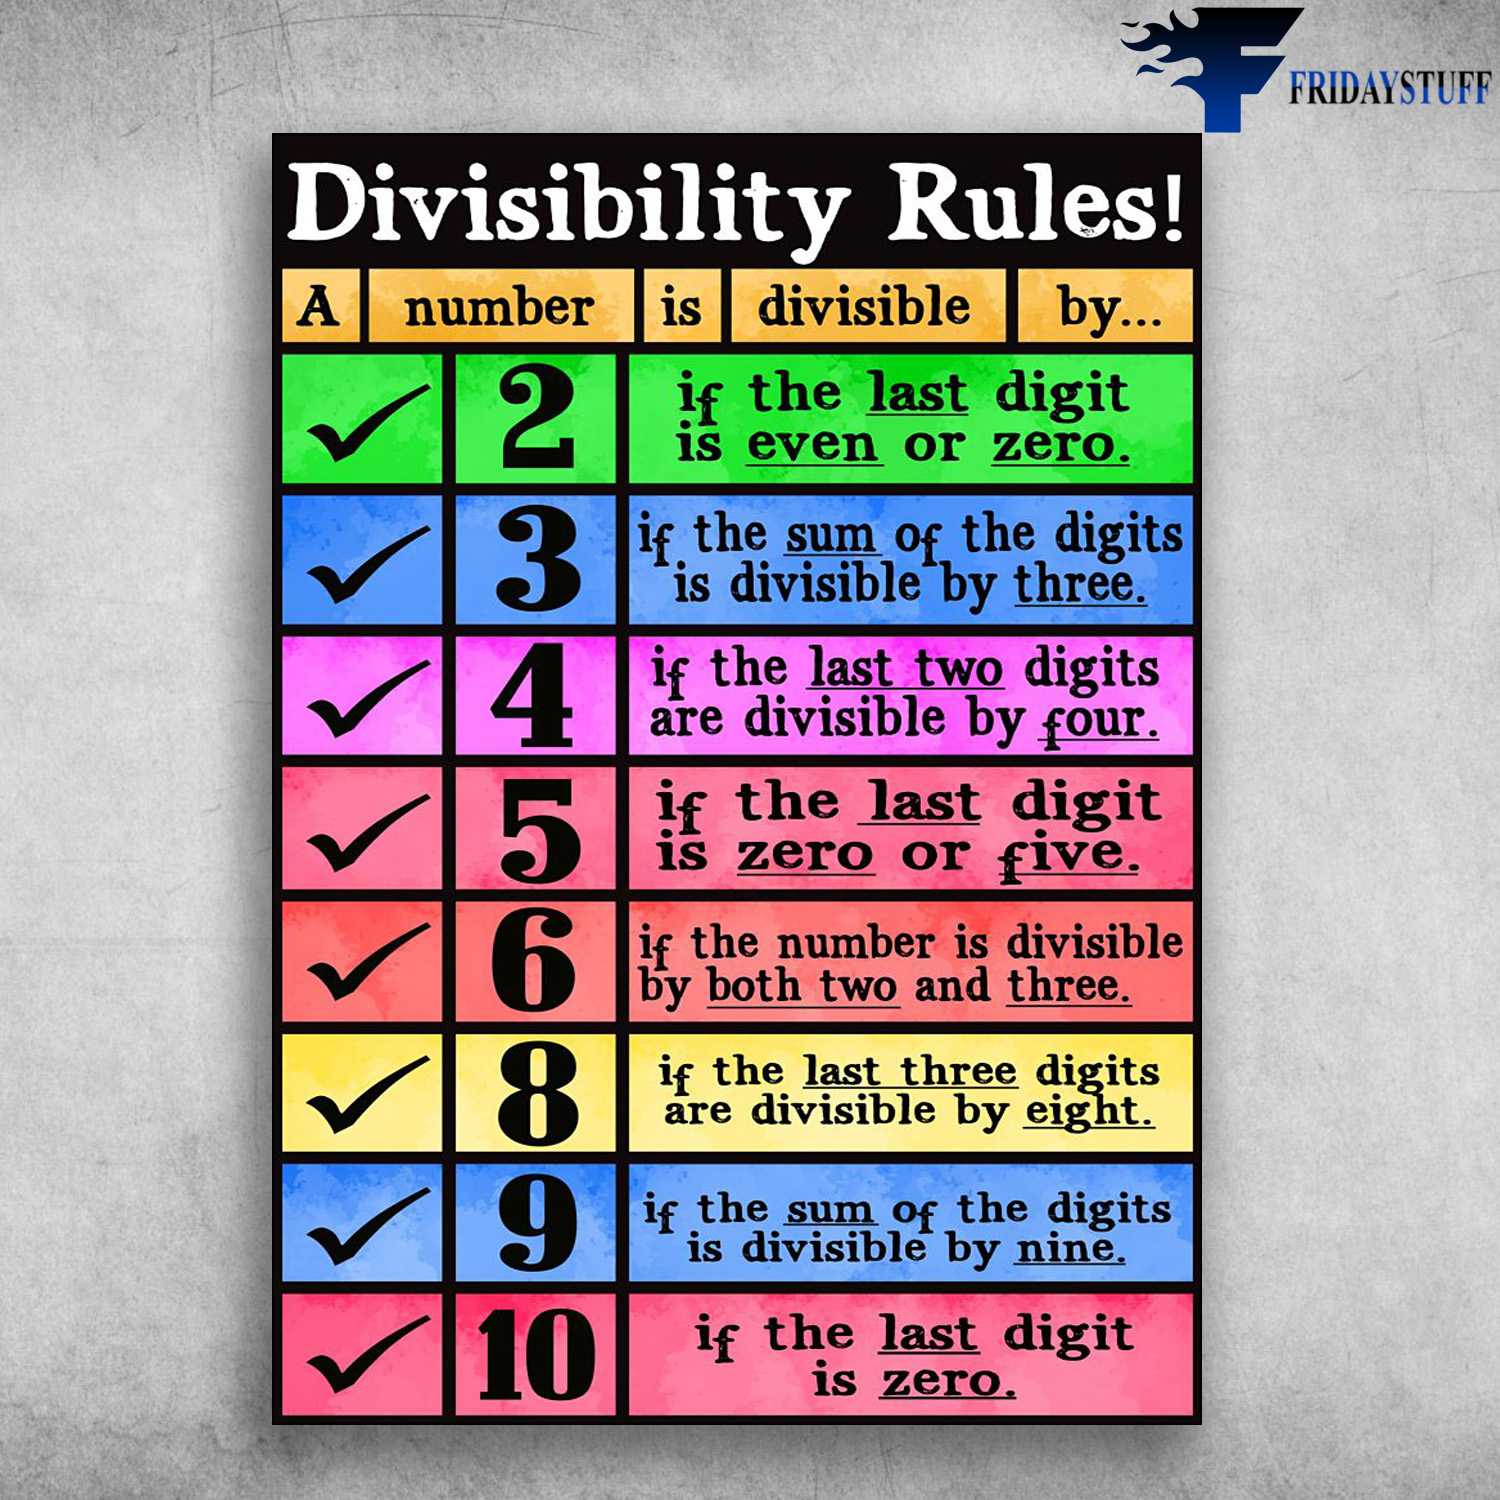 divisibility-rules-a-number-is-divisible-by-if-the-last-digit-is